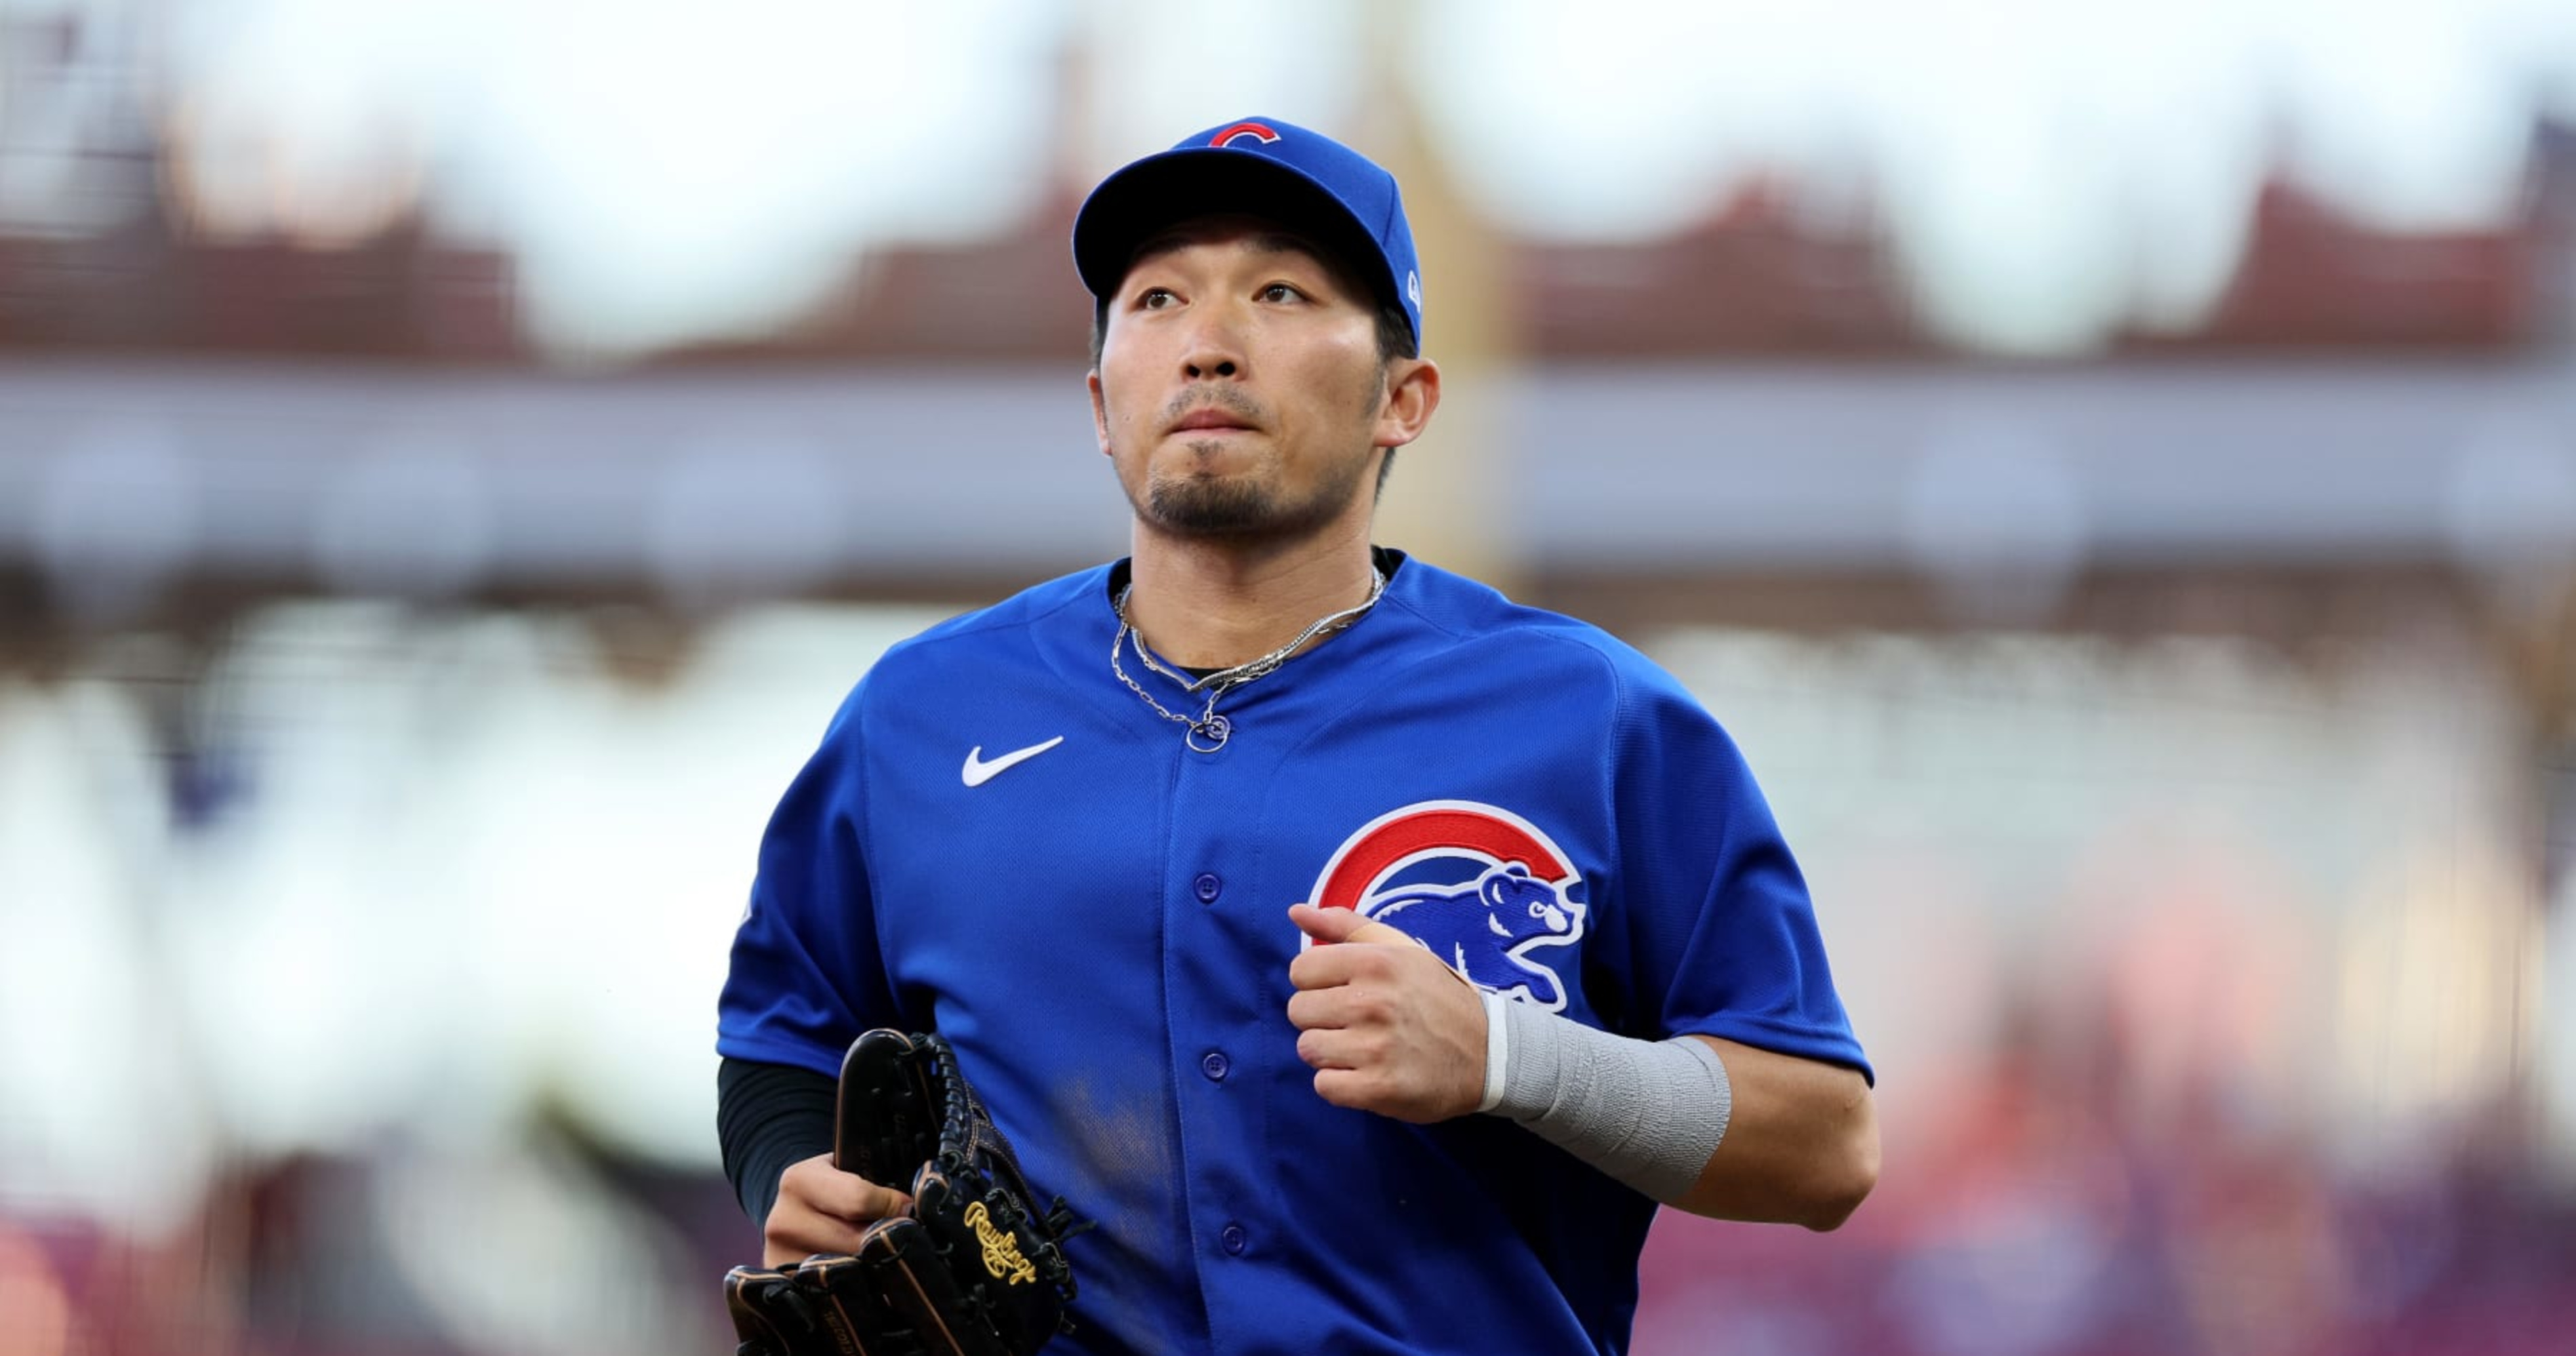 Why Japanese star Seiya Suzuki chose the Cubs over other suitors